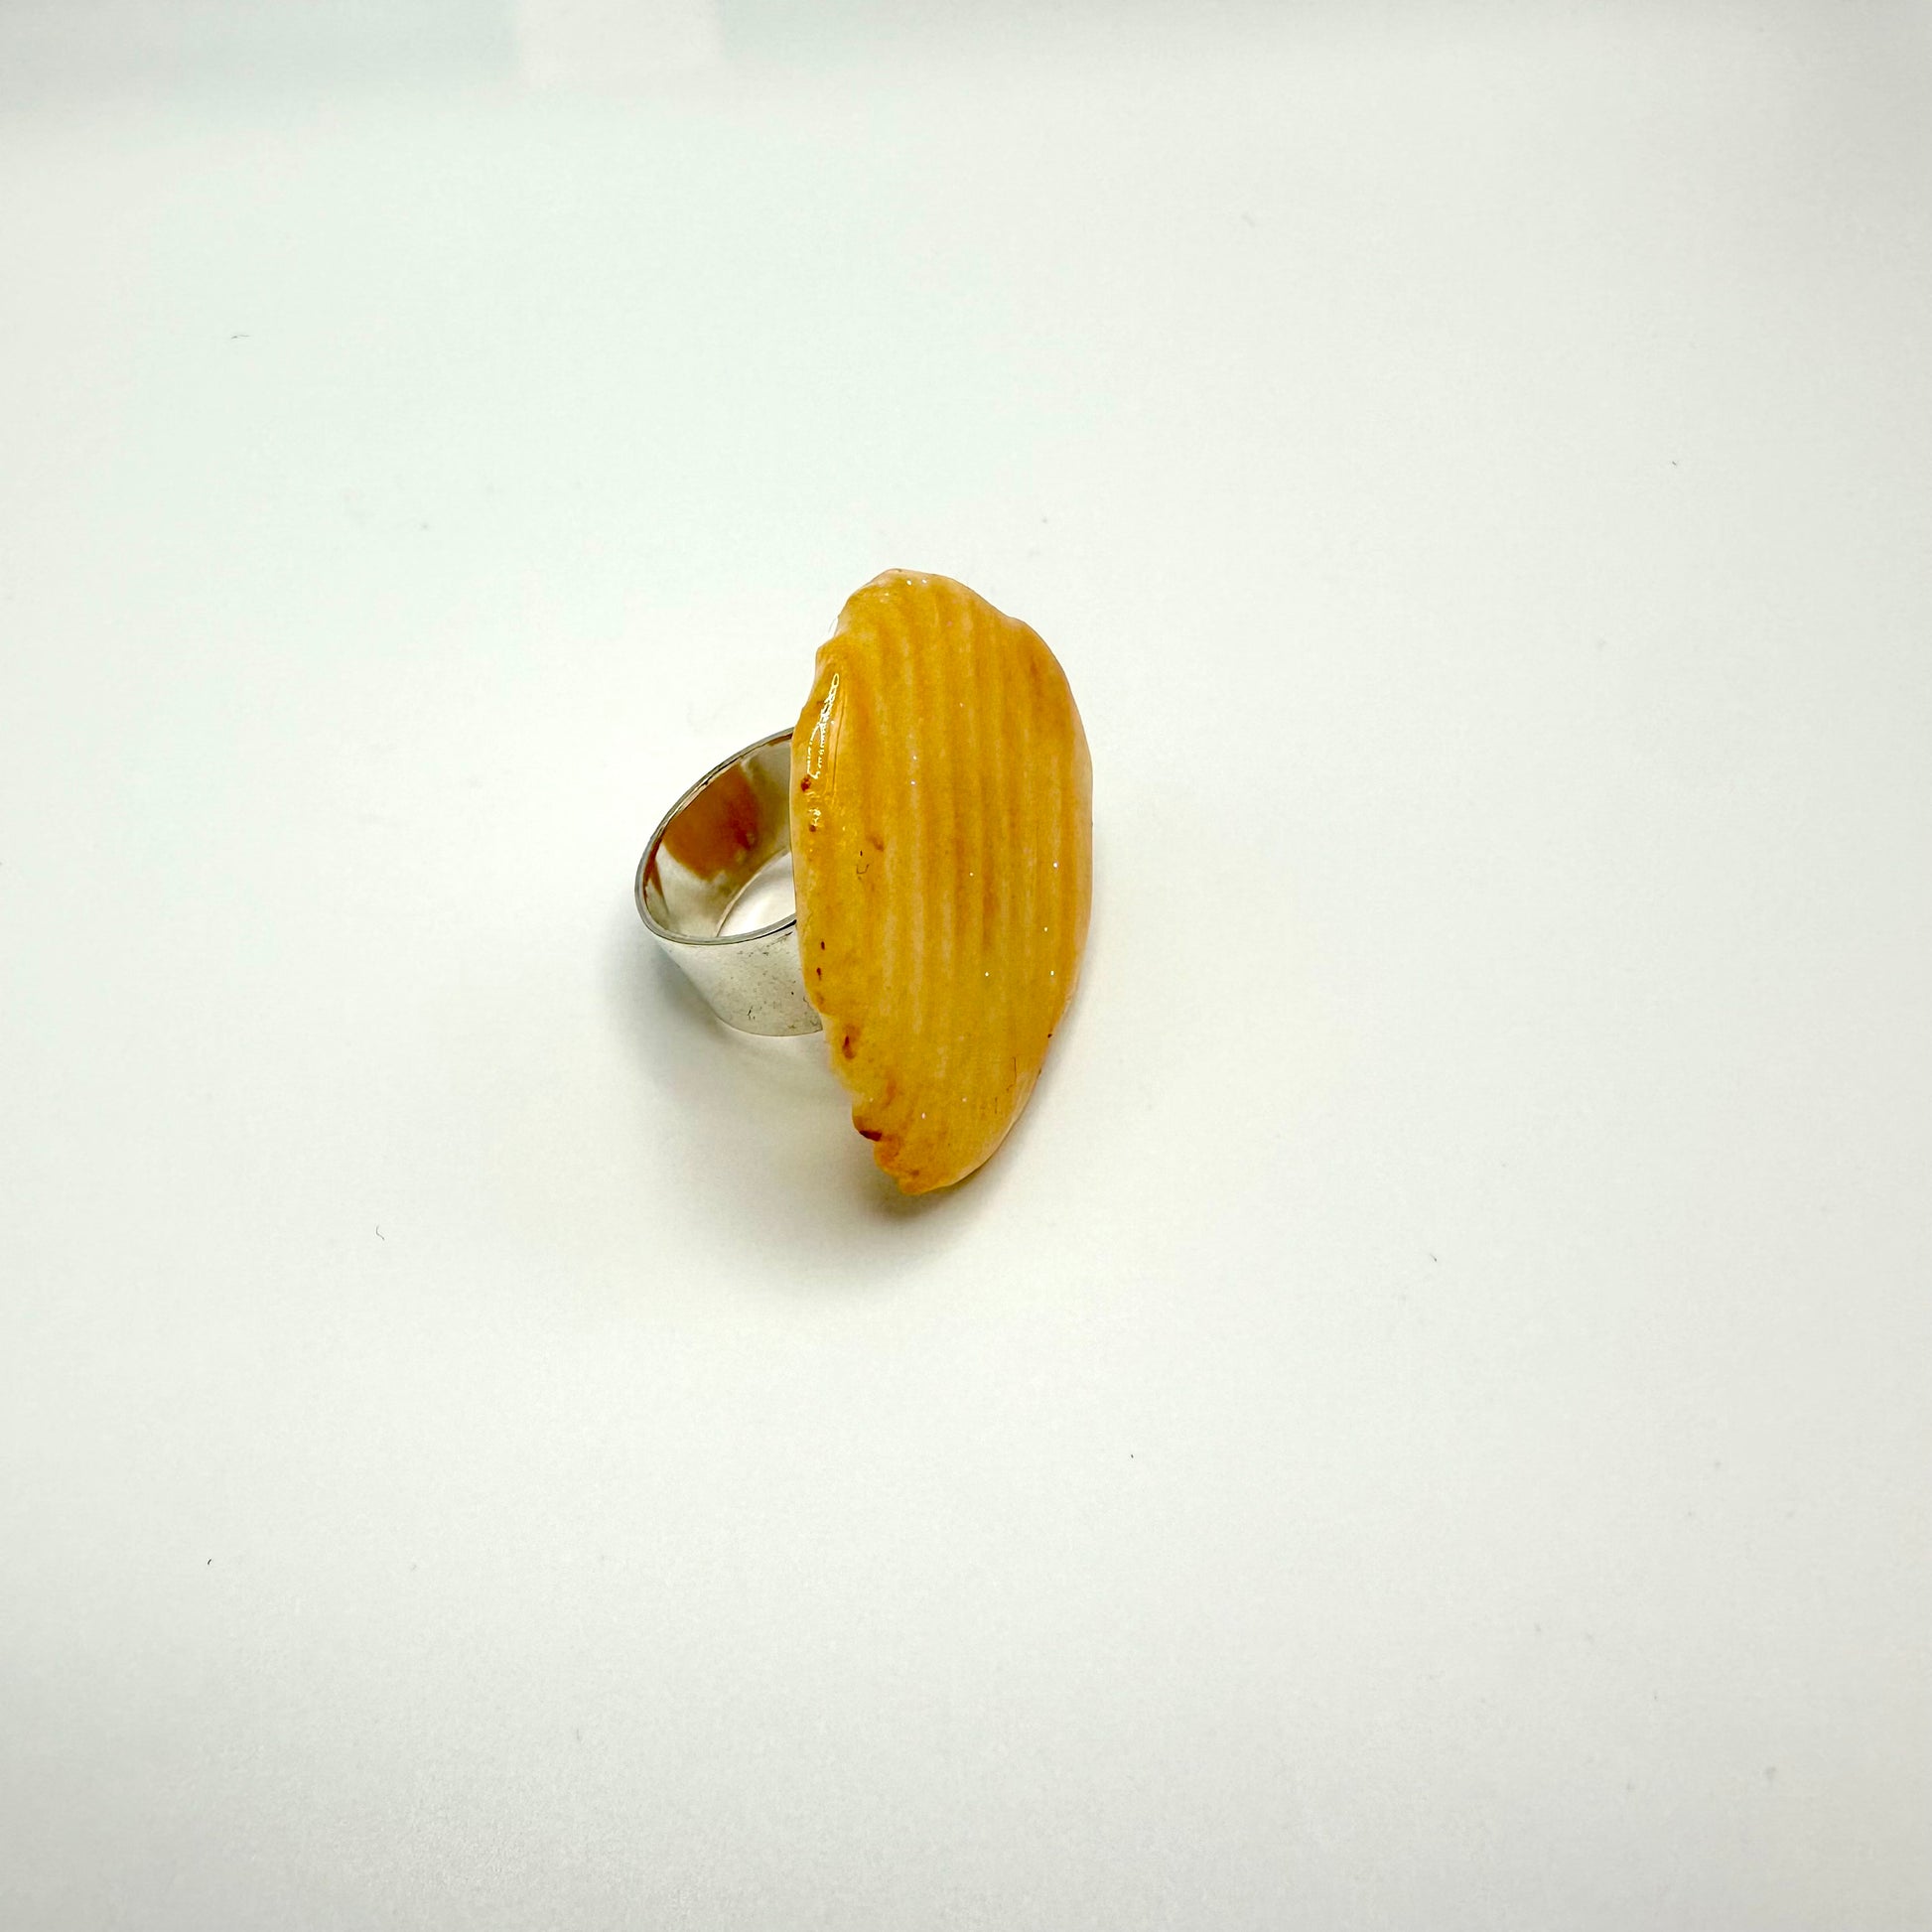 Ruffle chip ring dipped in resin.